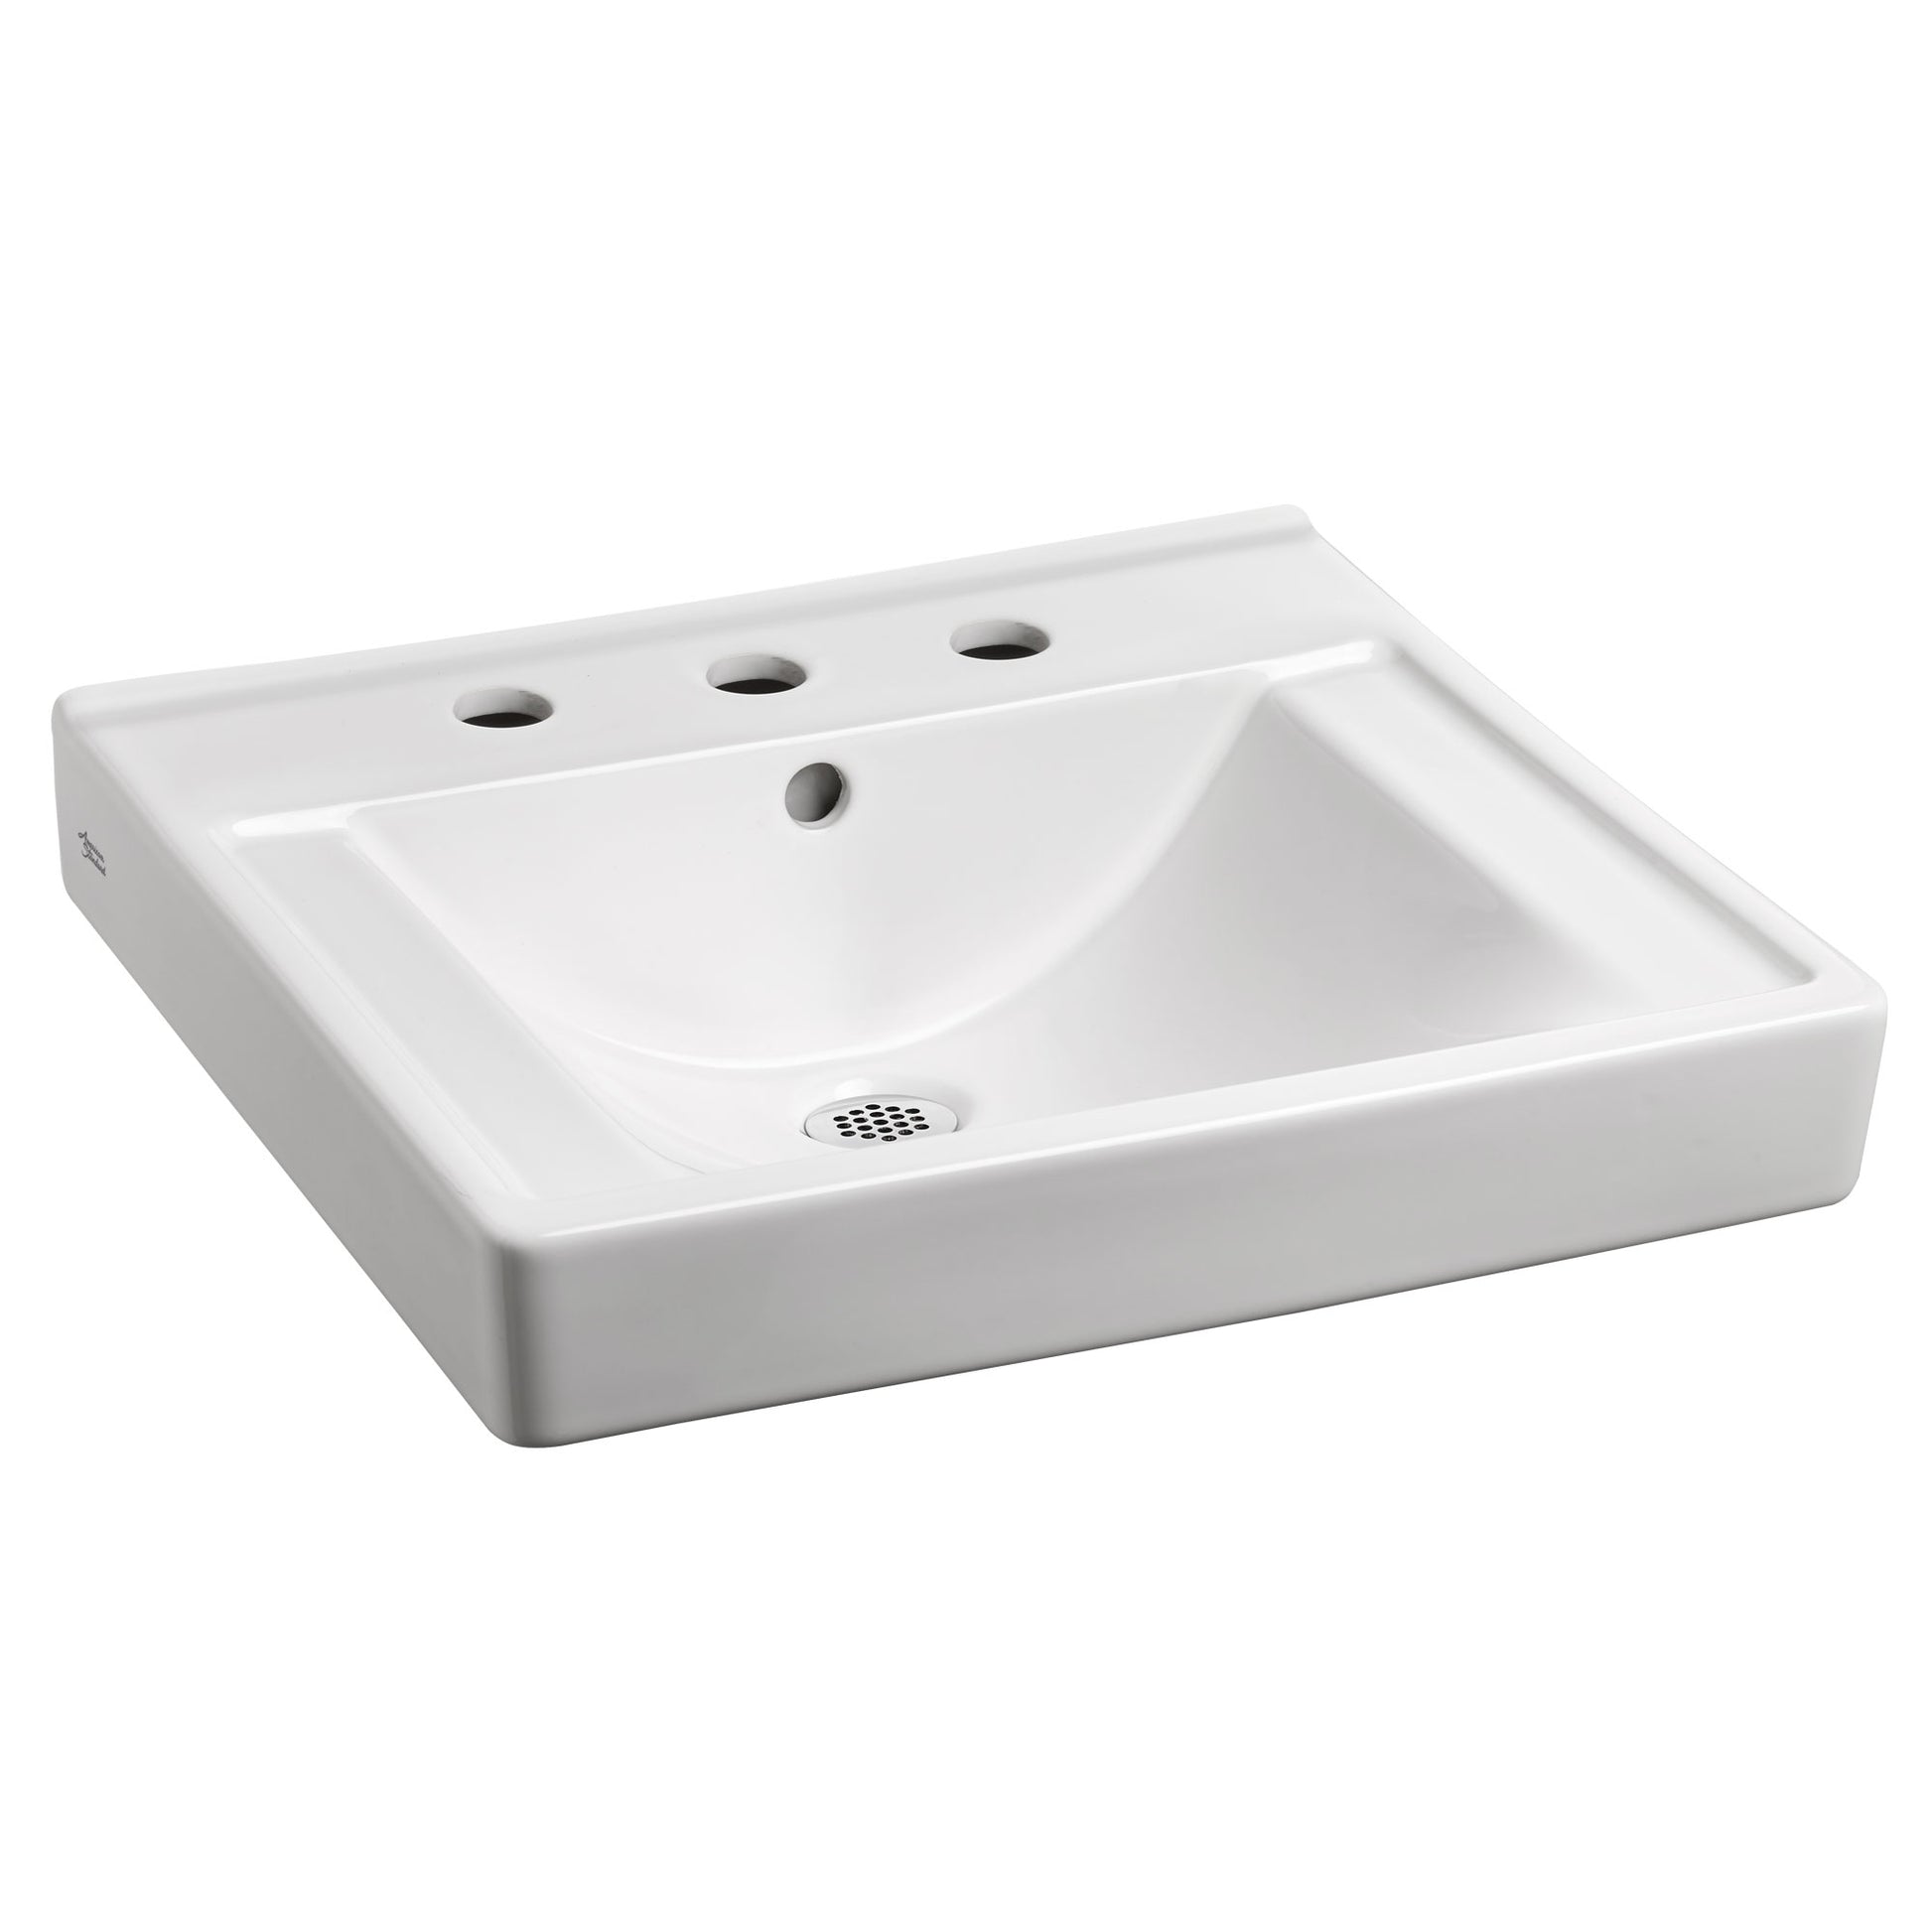 AMERICAN-STANDARD 9024008EC.020, Decorum Wall-Hung EverClean Sink With 8-Inch Widespread in White